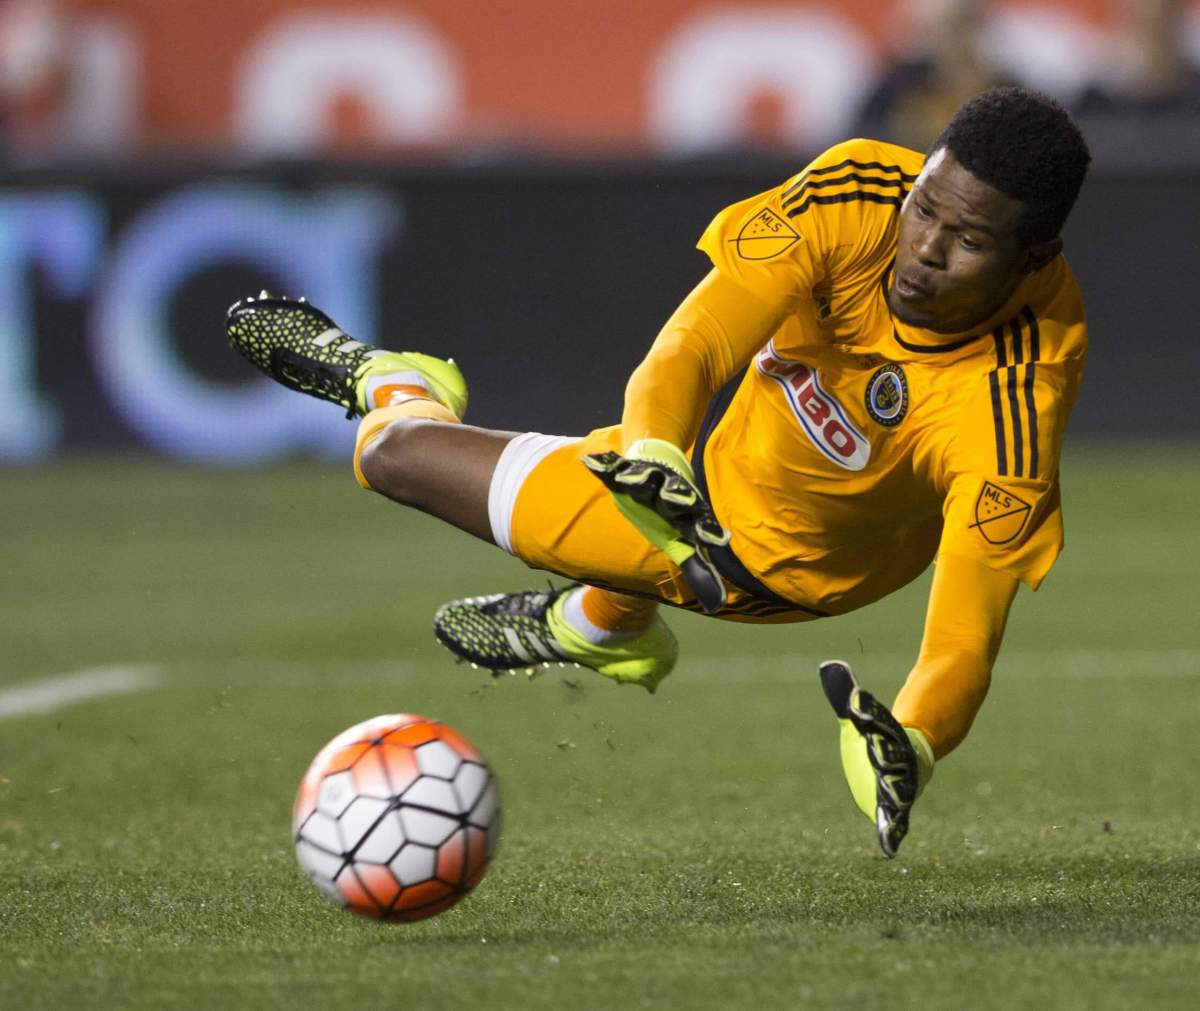 2015 season a complete disappointment for Philly Union